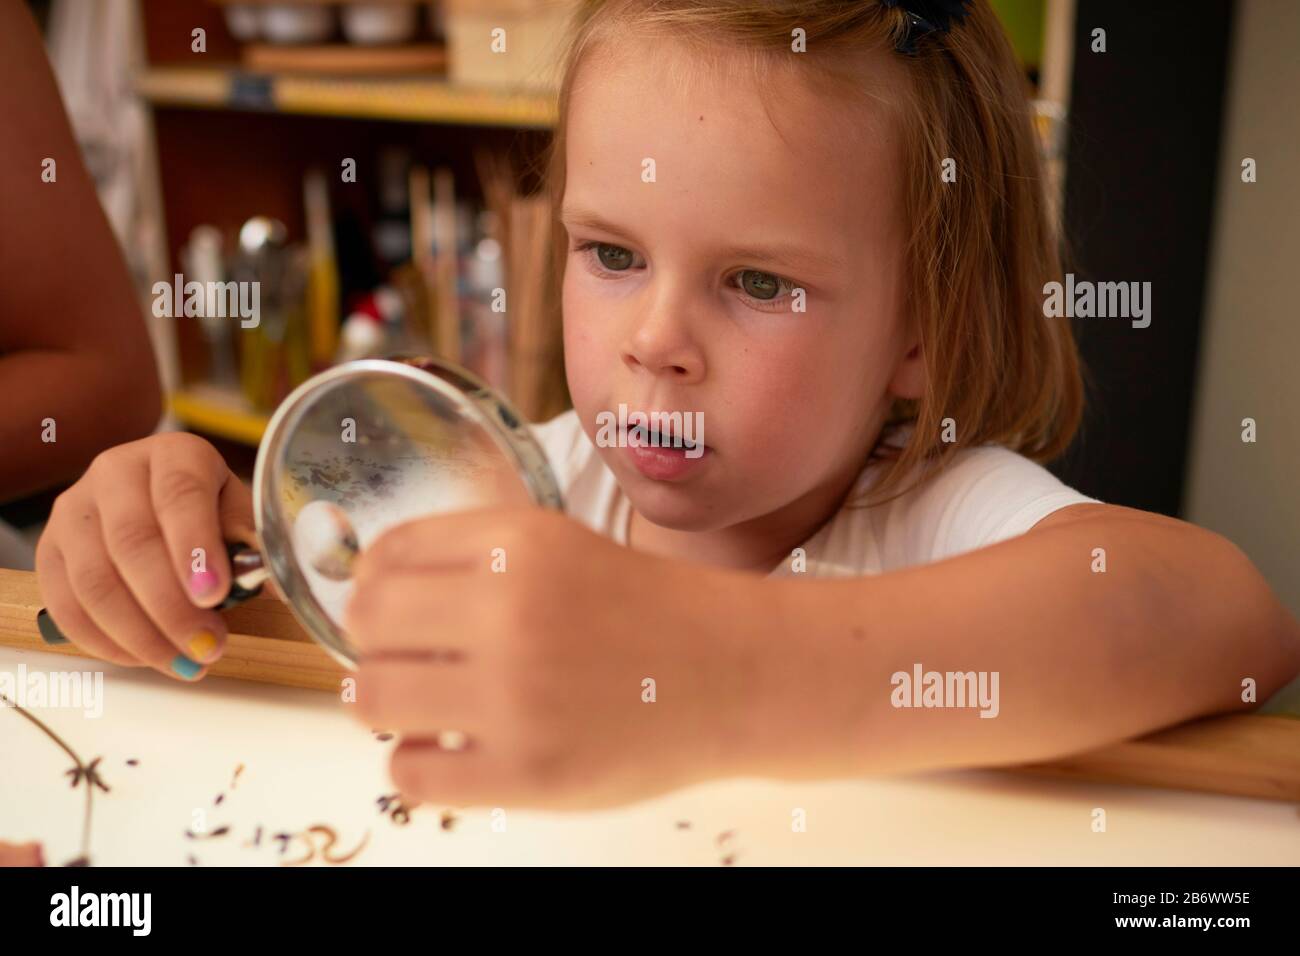 Children investigating food. A girl looks through a magnifying glass at dried flowers. Learning according to the Reggio Pedagogy principle, playful understanding and discovery. Germany. Stock Photo